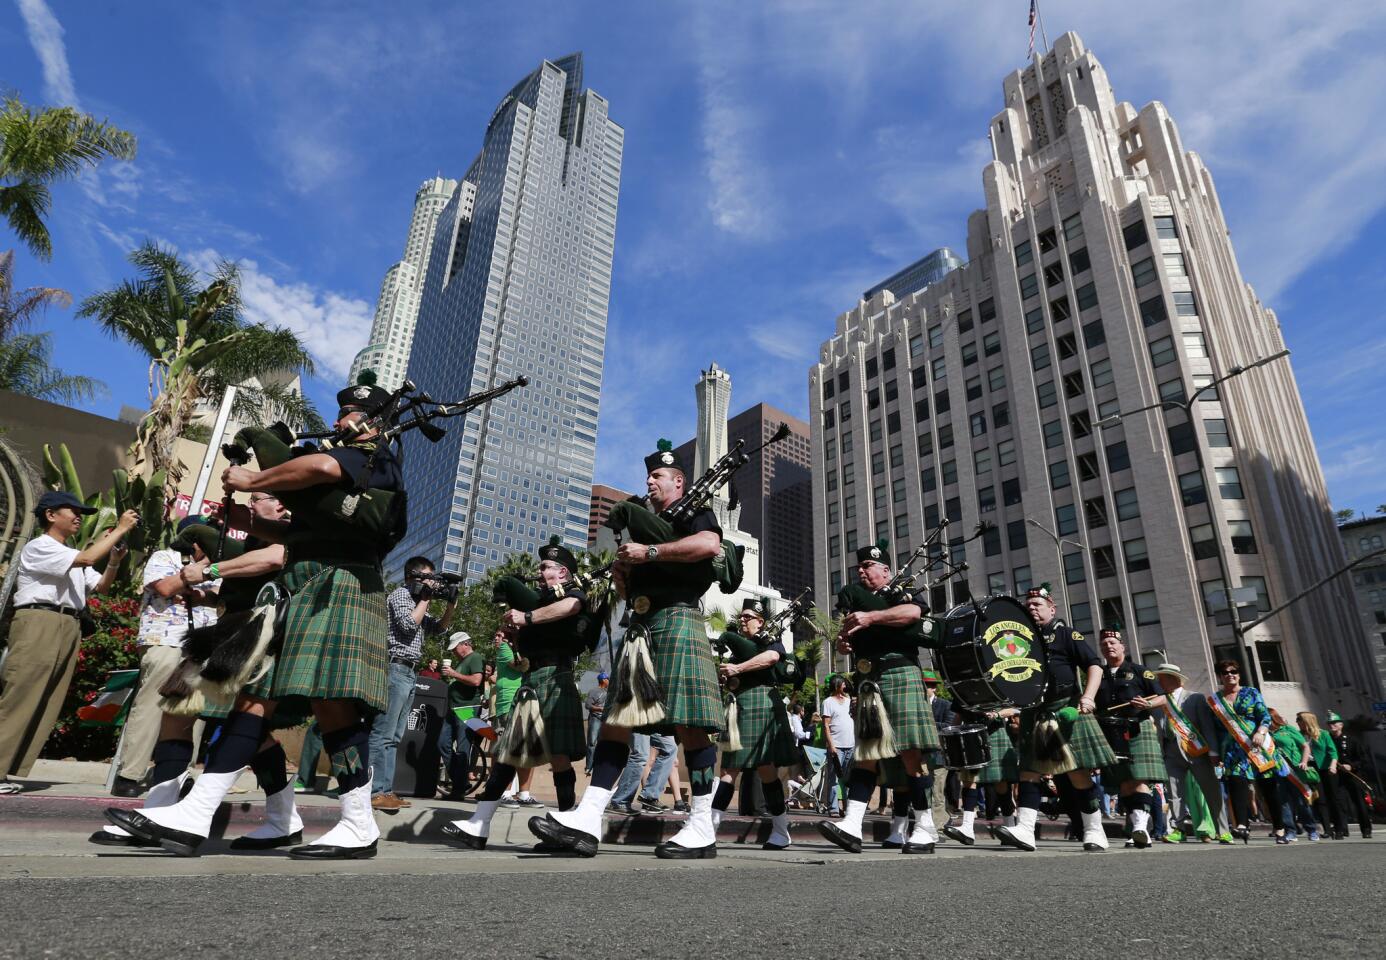 Members of the L.A. Police Emerald Society's Pipes and Drums Band march in the St. Patrick's Day parade in downtown Los Angeles.